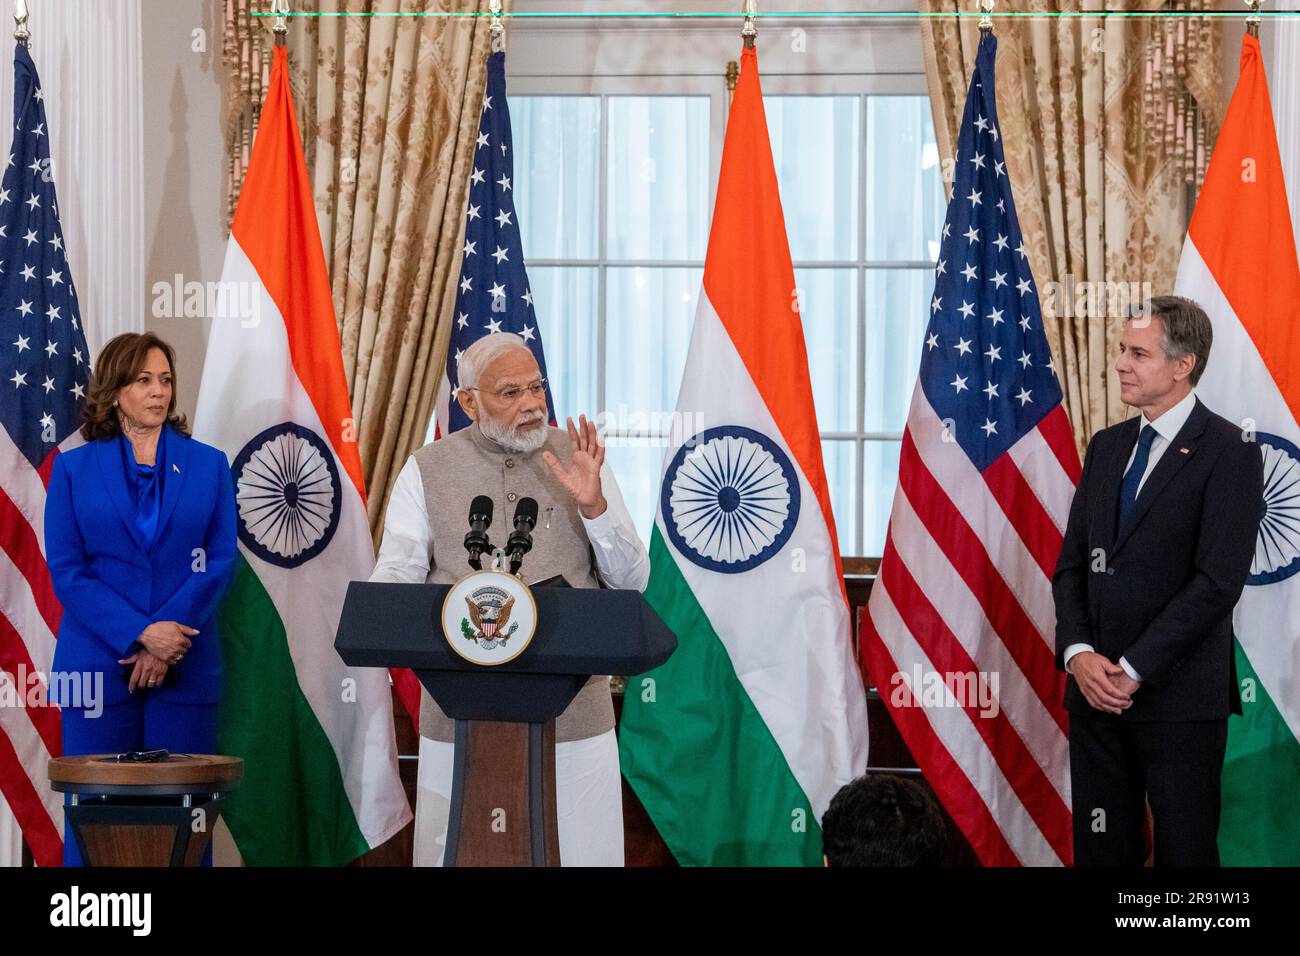 United States Vice President Kamala Harris, left, and United States Secretary of State Antony Blinken, right, listen while Prime Minister Narendra Modi of the Republic of India, center, offers remarks during a luncheon at the U.S. Department of State in Washington, DC, Friday, June 23, 2023. Credit: Rod Lamkey/Pool via CNP Stock Photo